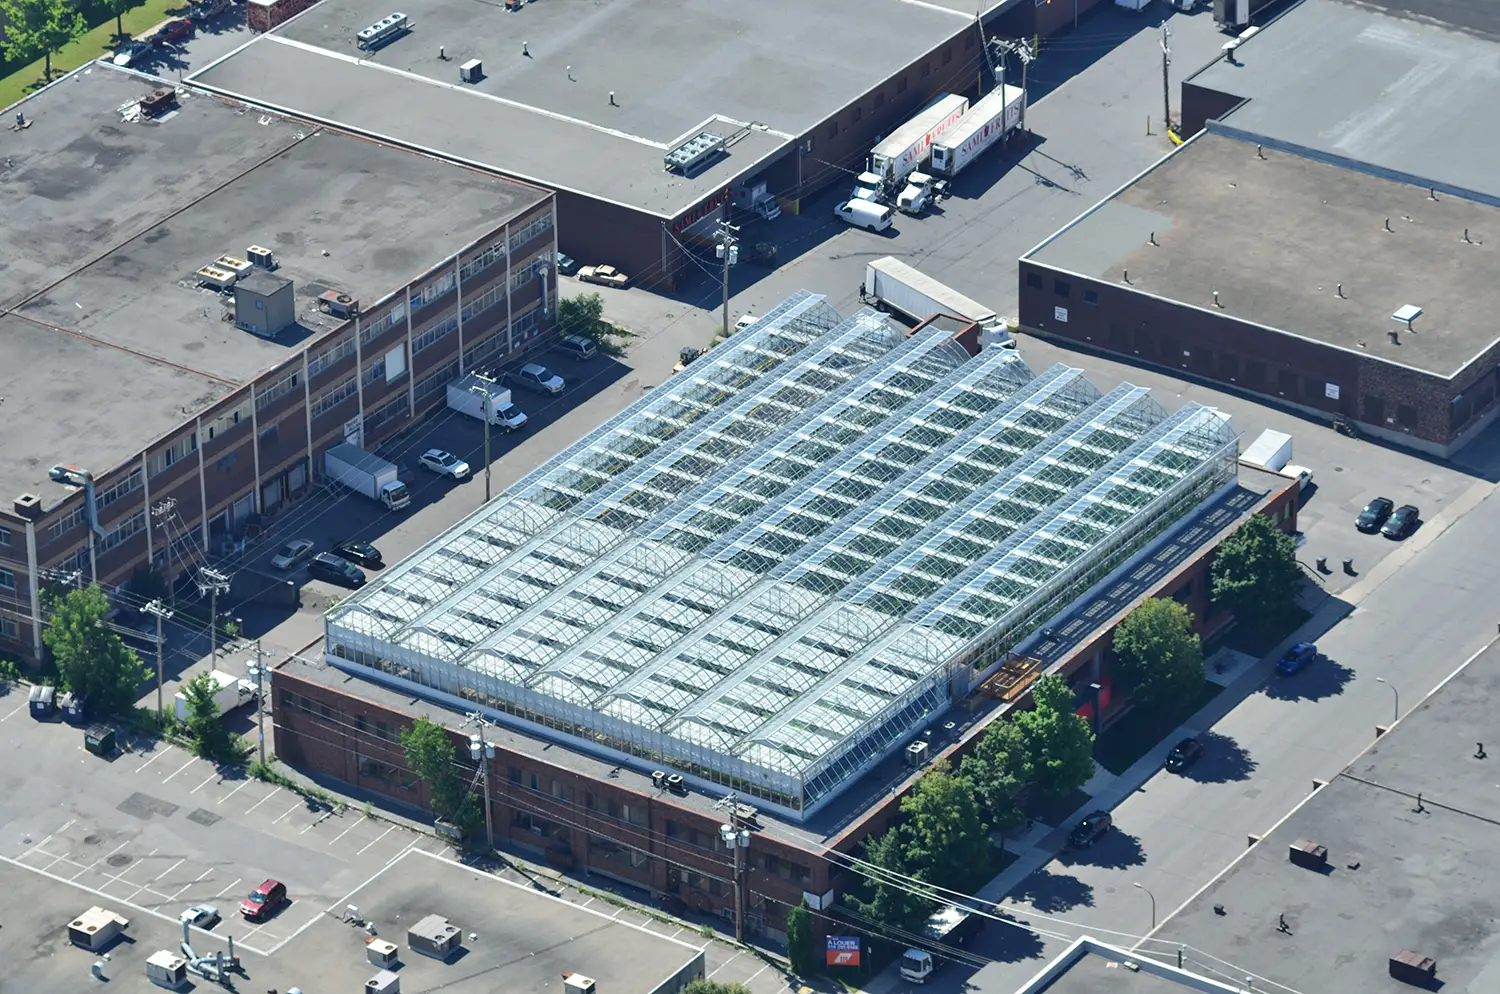 Rows of greenhouses mounted atop a warehouse.